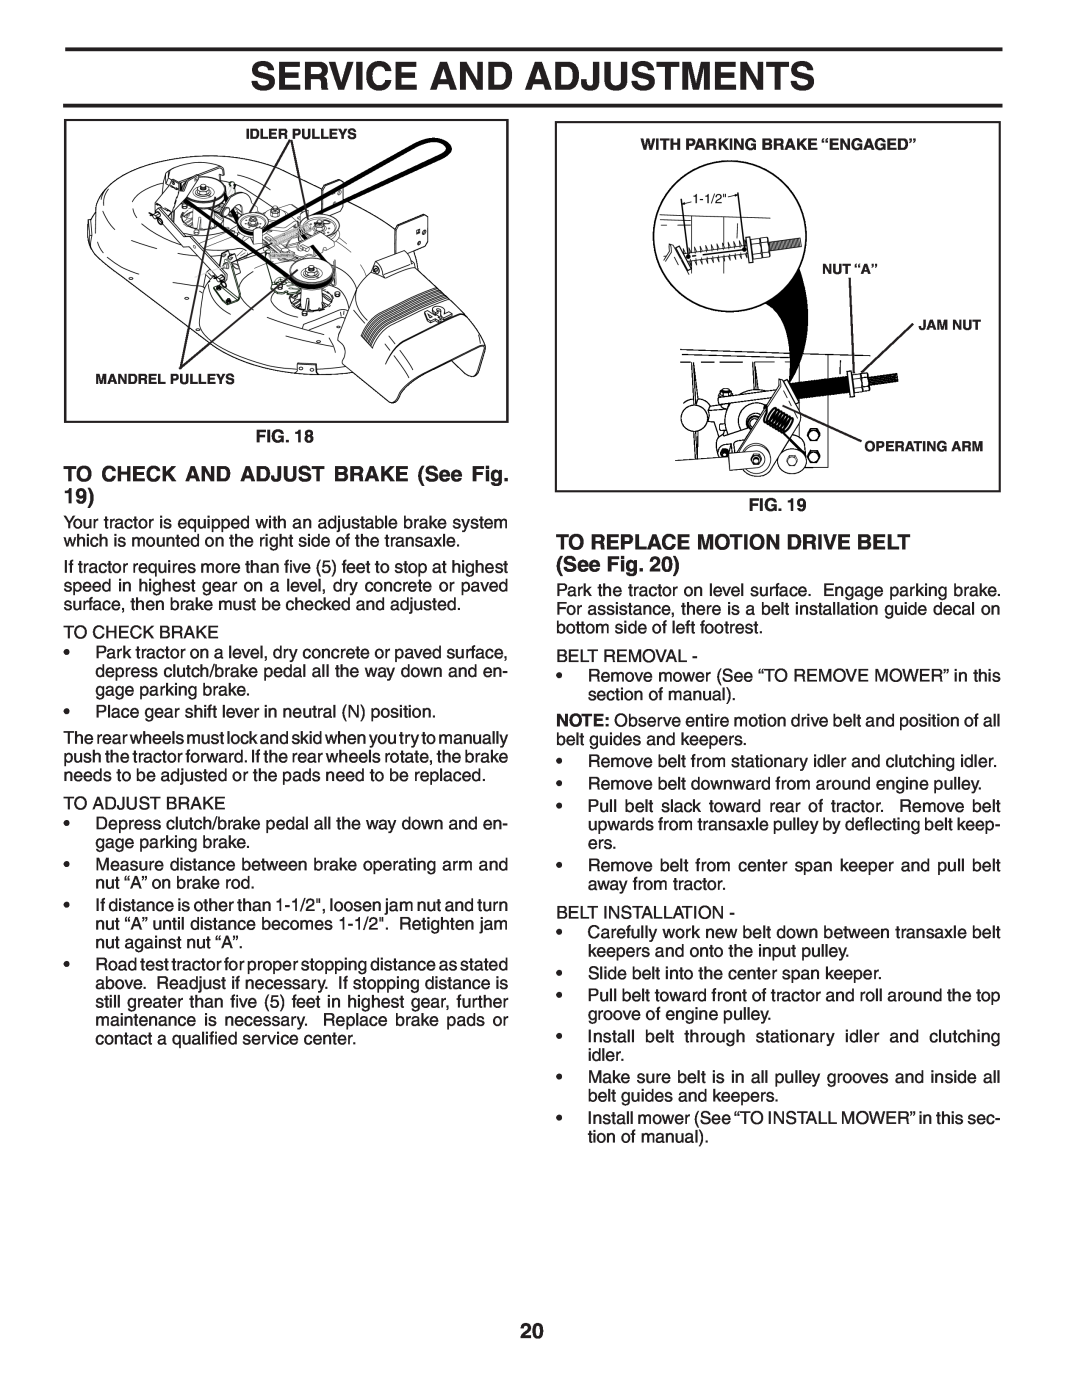 Weed Eater 191087 manual TO CHECK AND ADJUST BRAKE See Fig, TO REPLACE MOTION DRIVE BELT See Fig, Service And Adjustments 